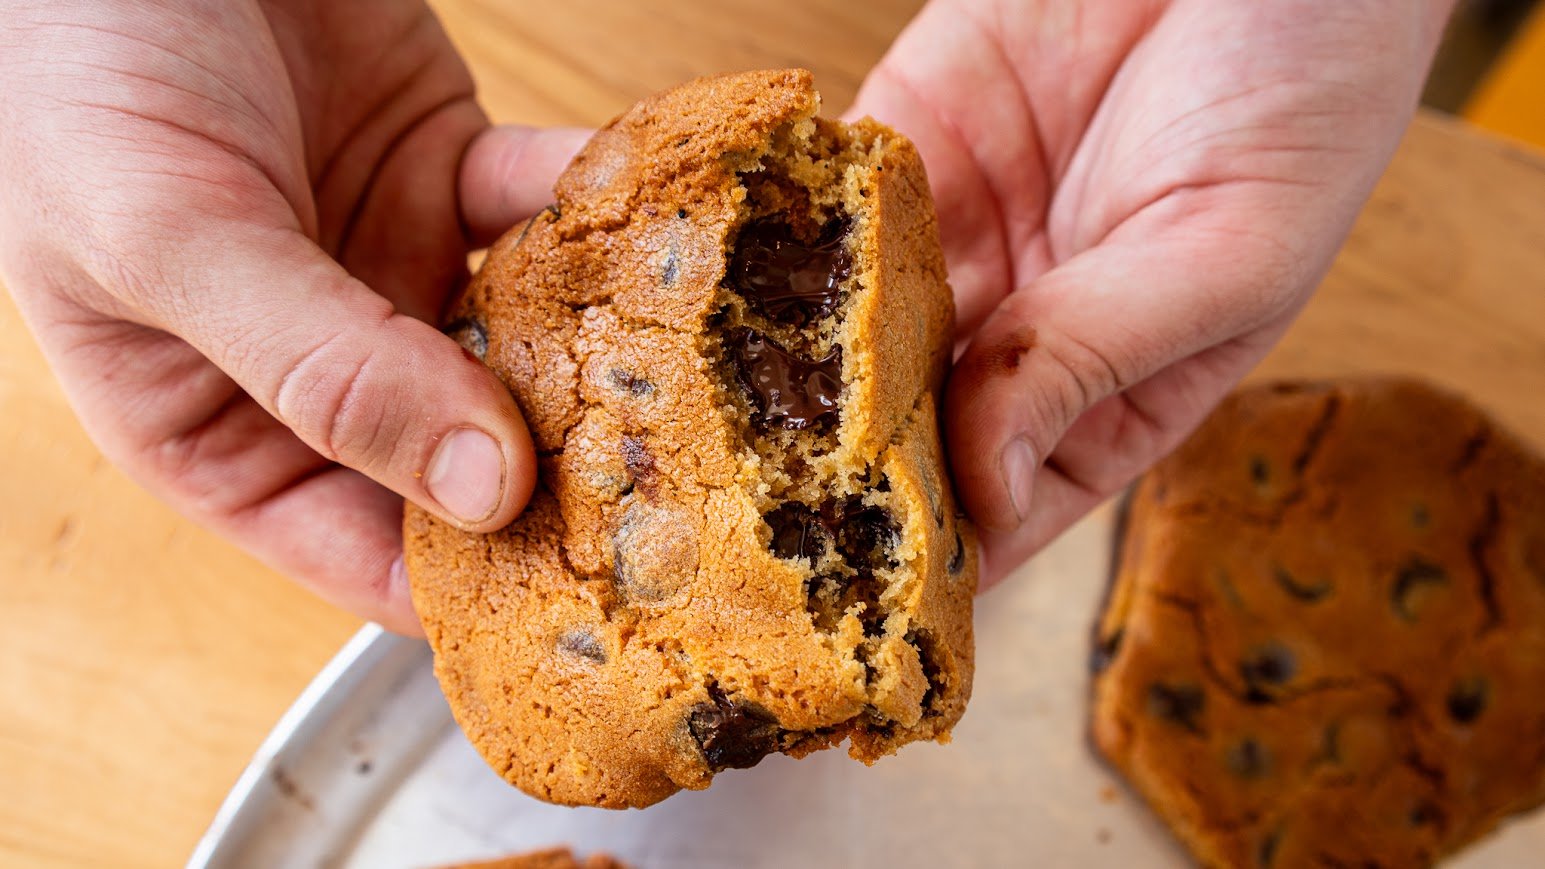 Fresh-baked chocolate chip cookies, made with the purest ingredients including dark chocolate chips.